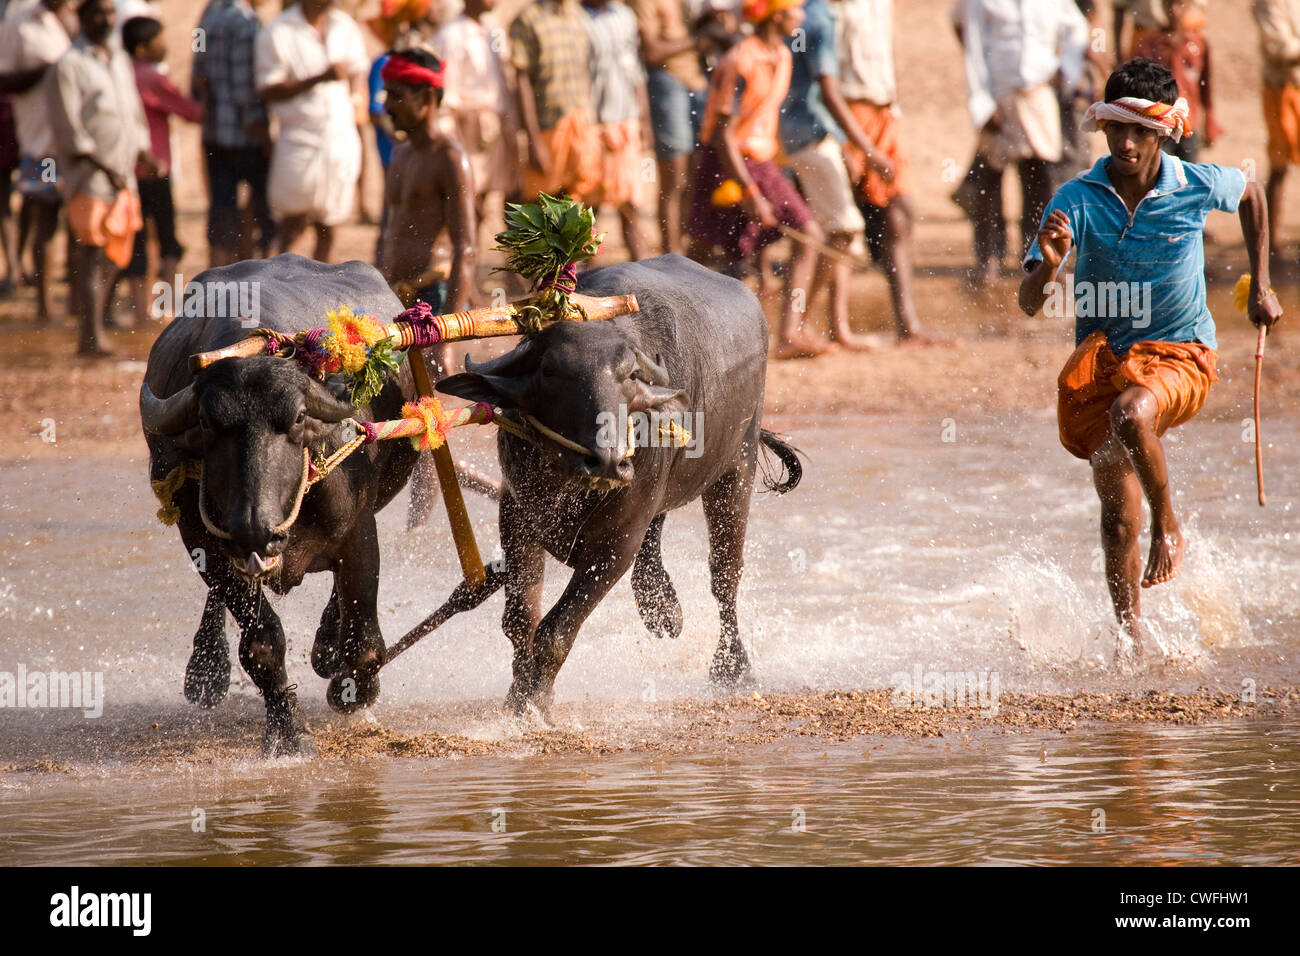 A man races after a pair of buffaloes which have broken free after a Kambala race in Karnataka, India. Stock Photo